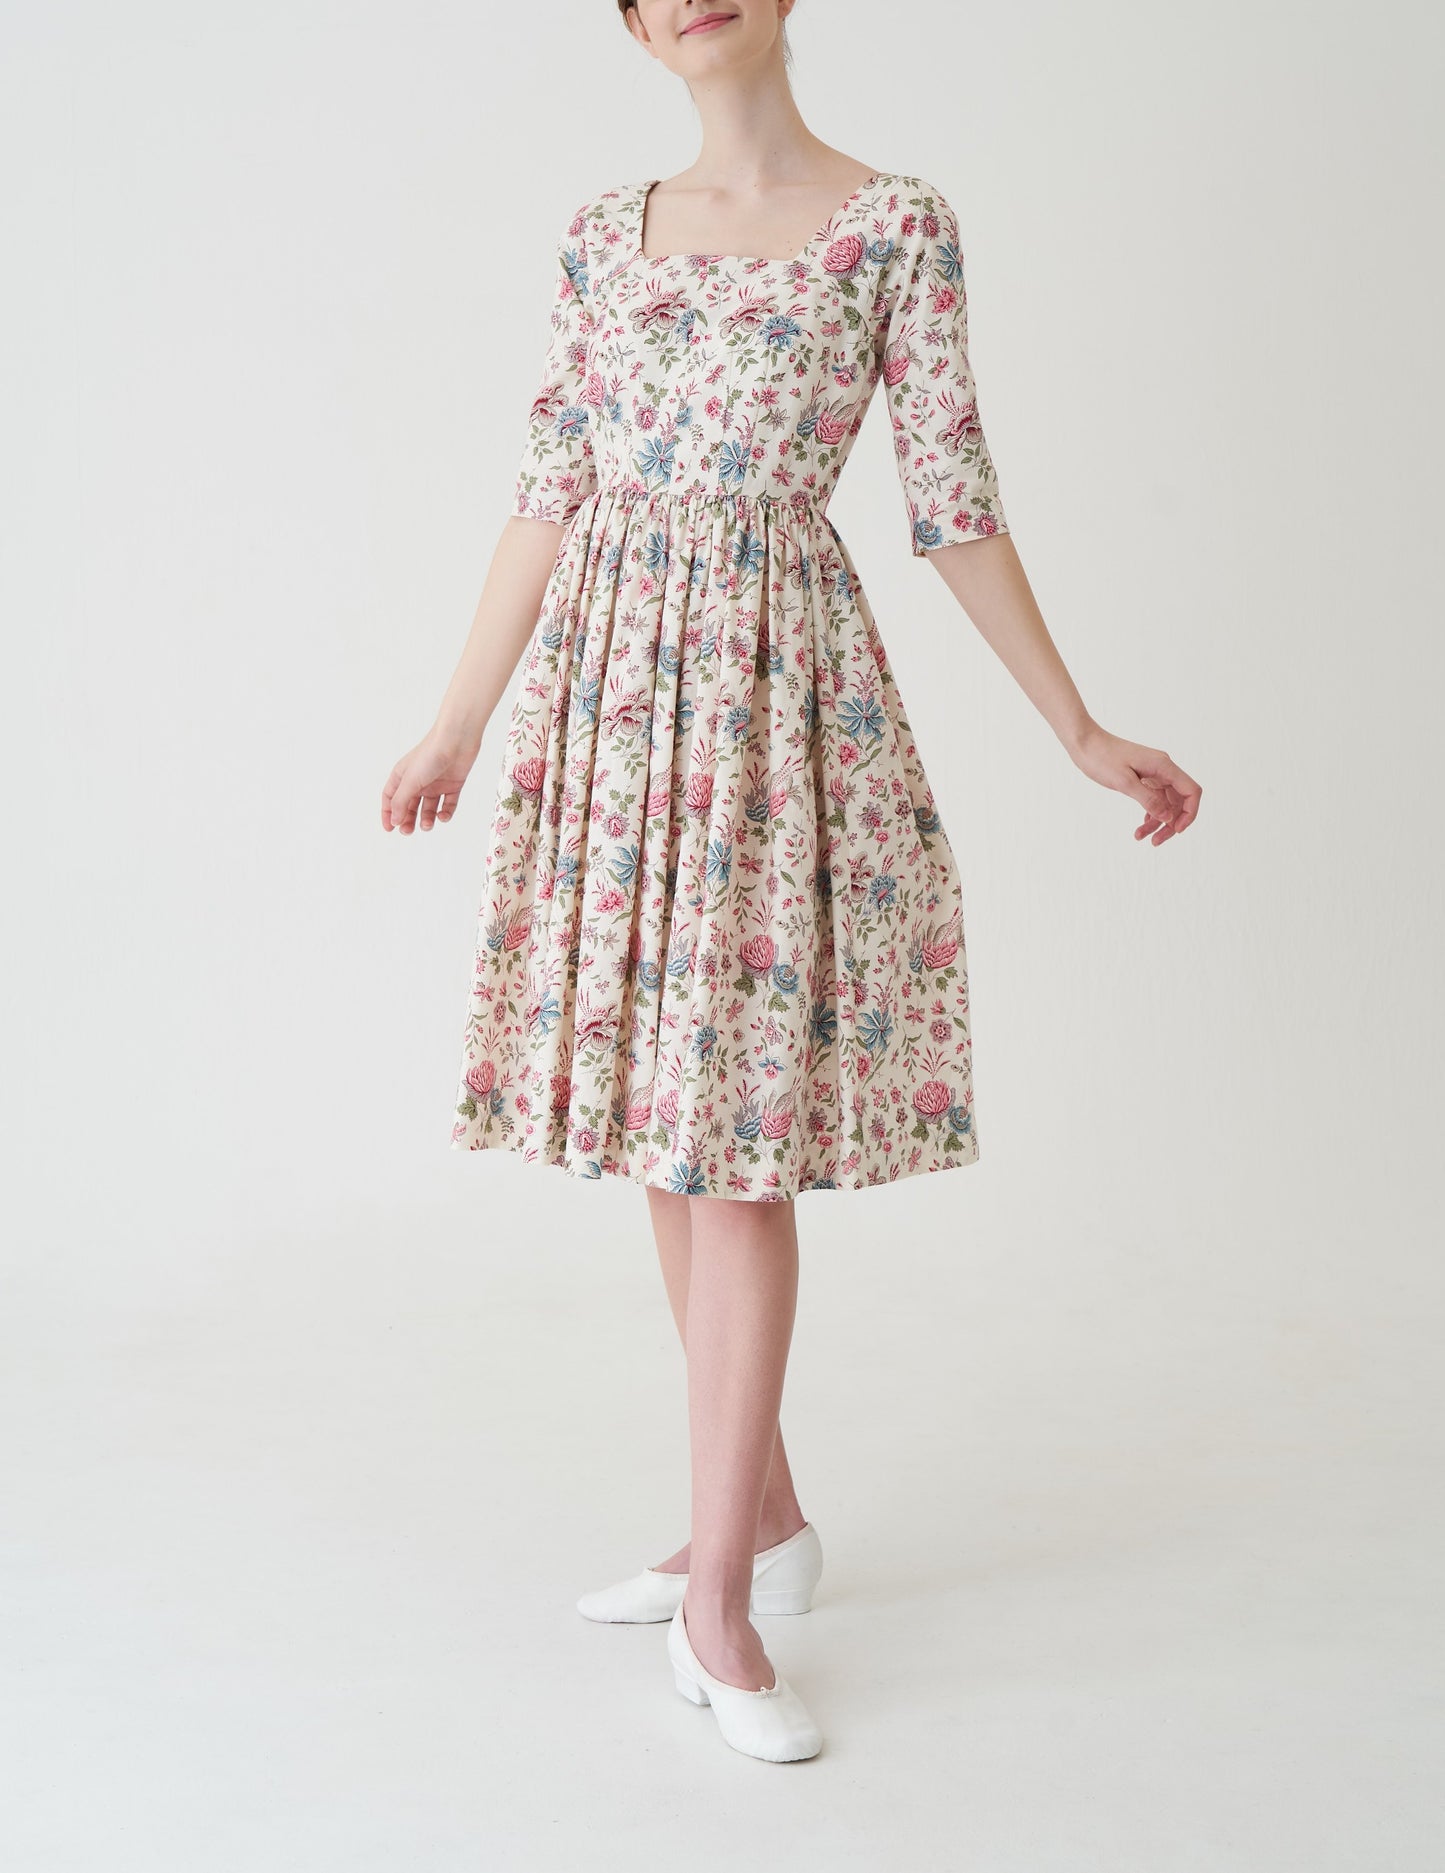 Cotton Provencal floral print dress *Made to order